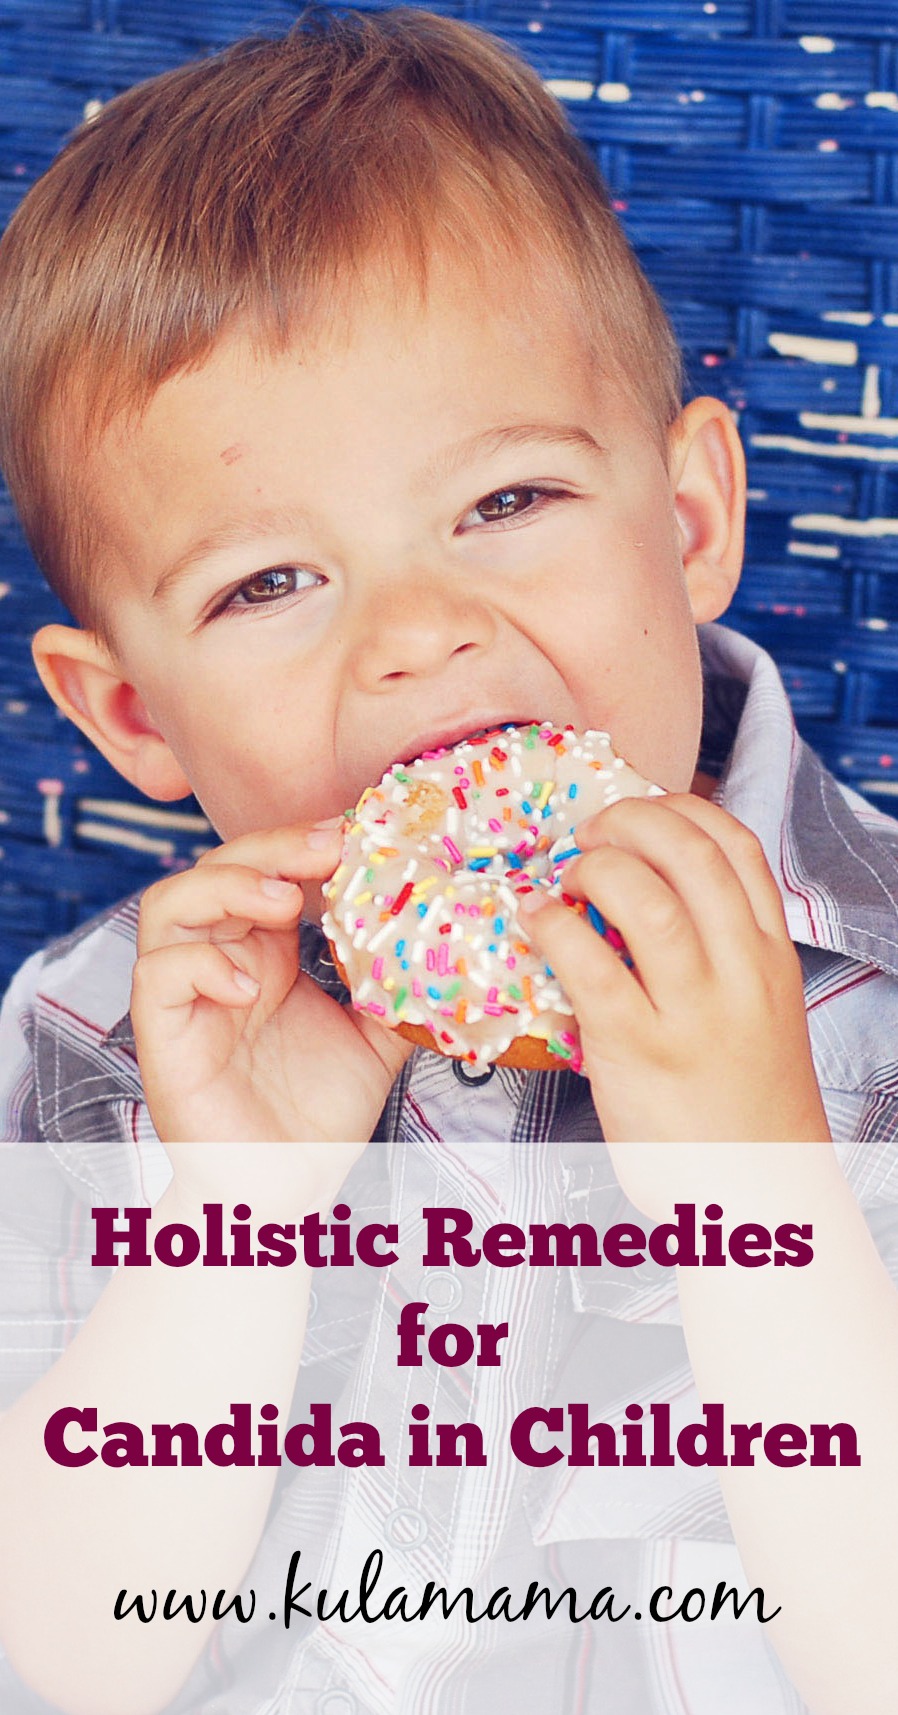 holistic remedies for candida and yeast infection in children